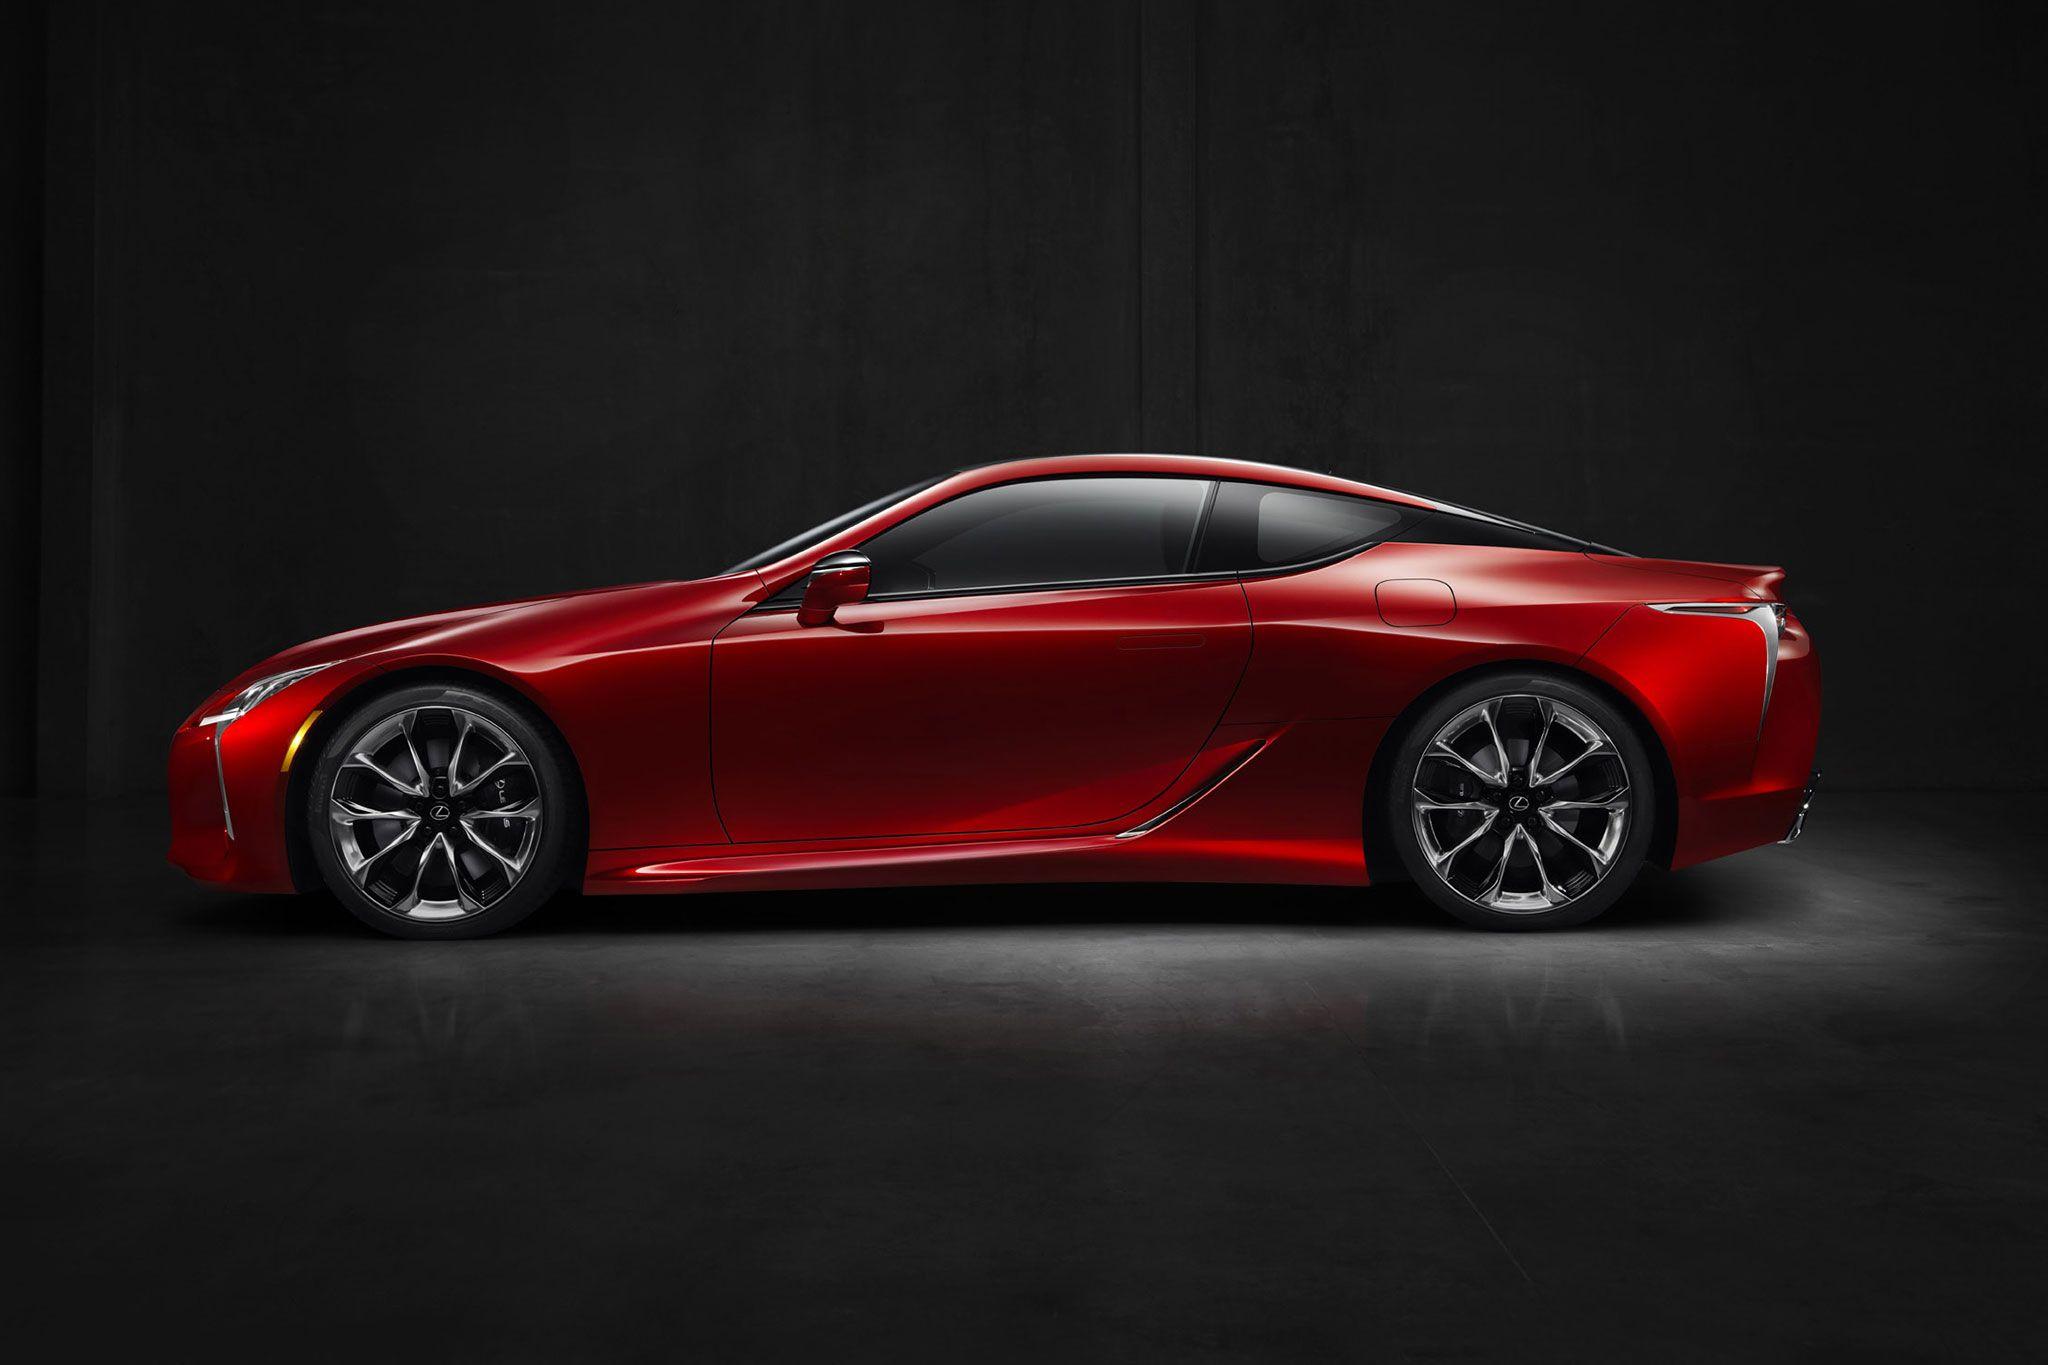 Lexus LC F Confirmed by European Trademark Filing Photo & Image Gallery